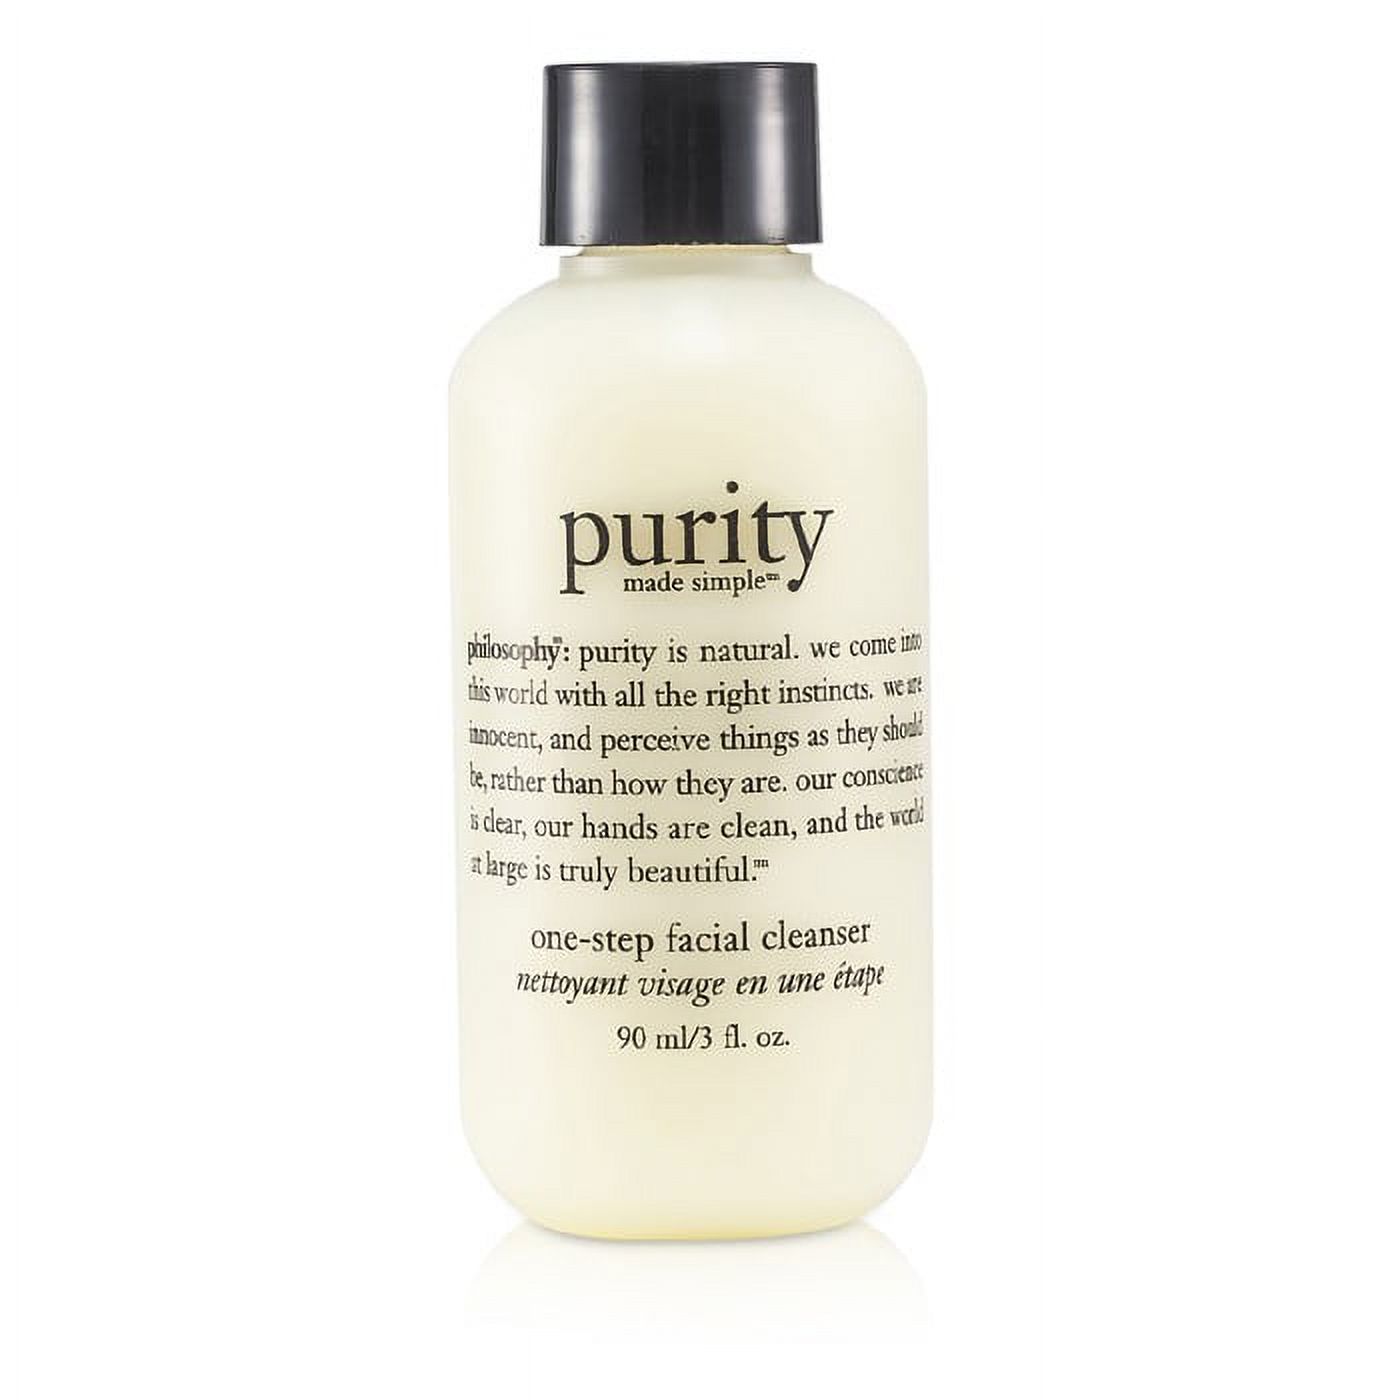 Philosophy Purity Made Simple - One Step Facial Cleanser - 90ml/3oz - image 1 of 1